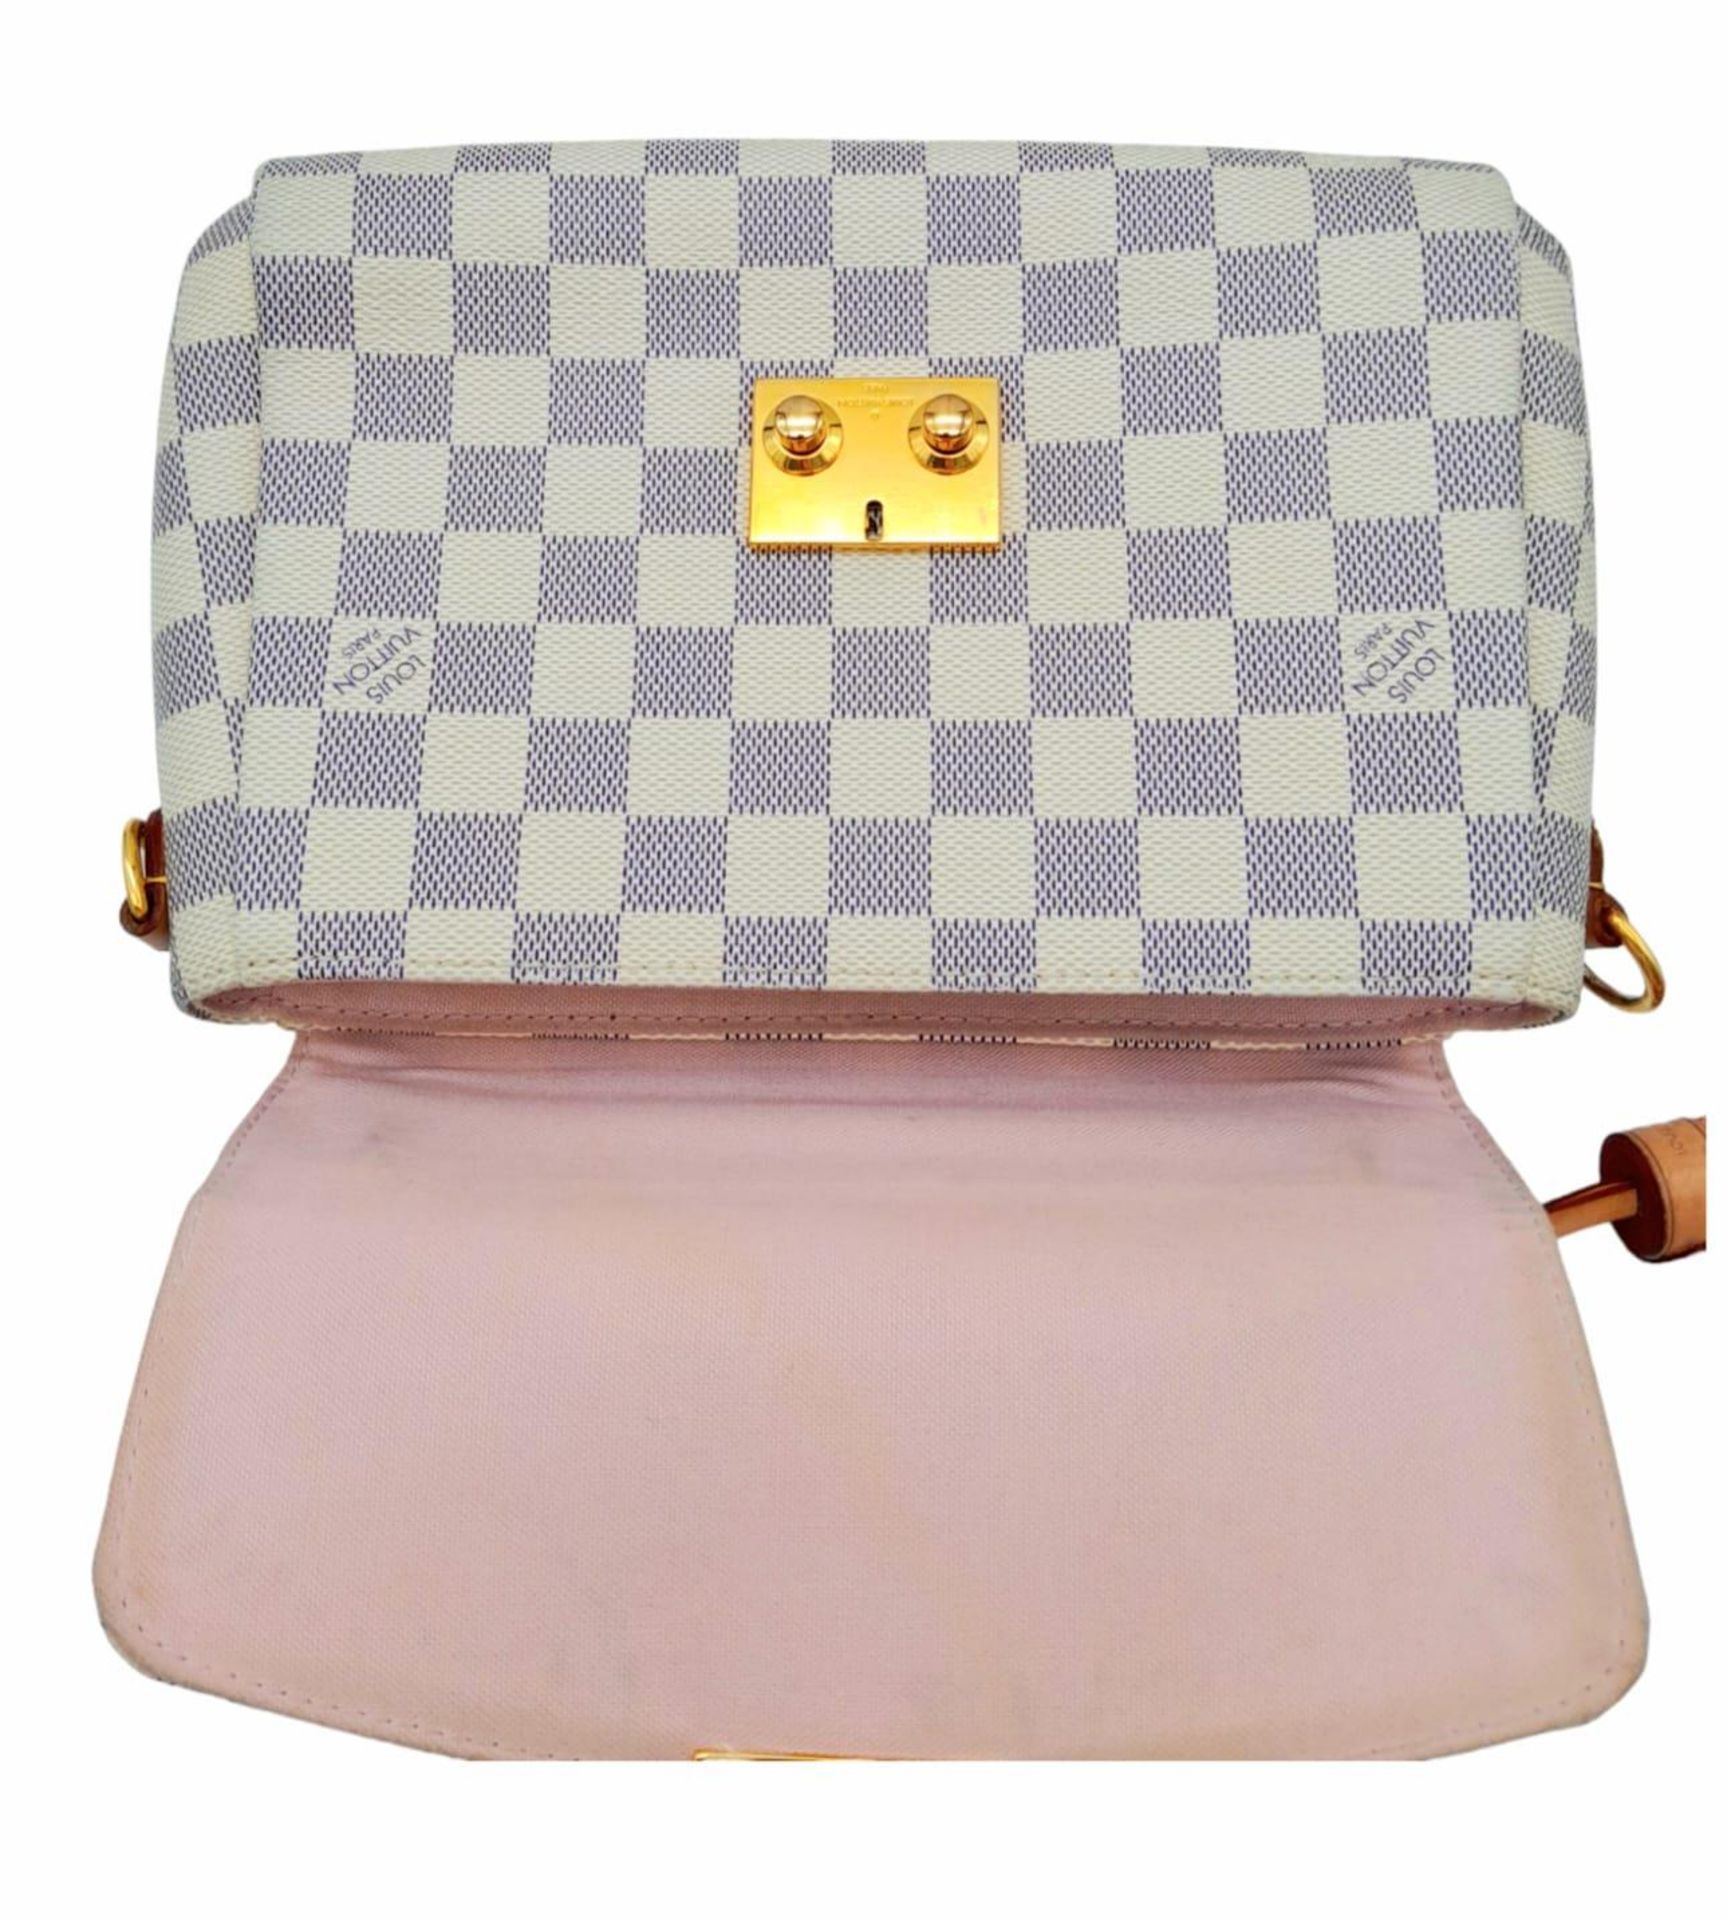 A Louis Vuitton damier canvas Croisette handbag in cream/blue, interior is baby pink. Leather handle - Image 6 of 12